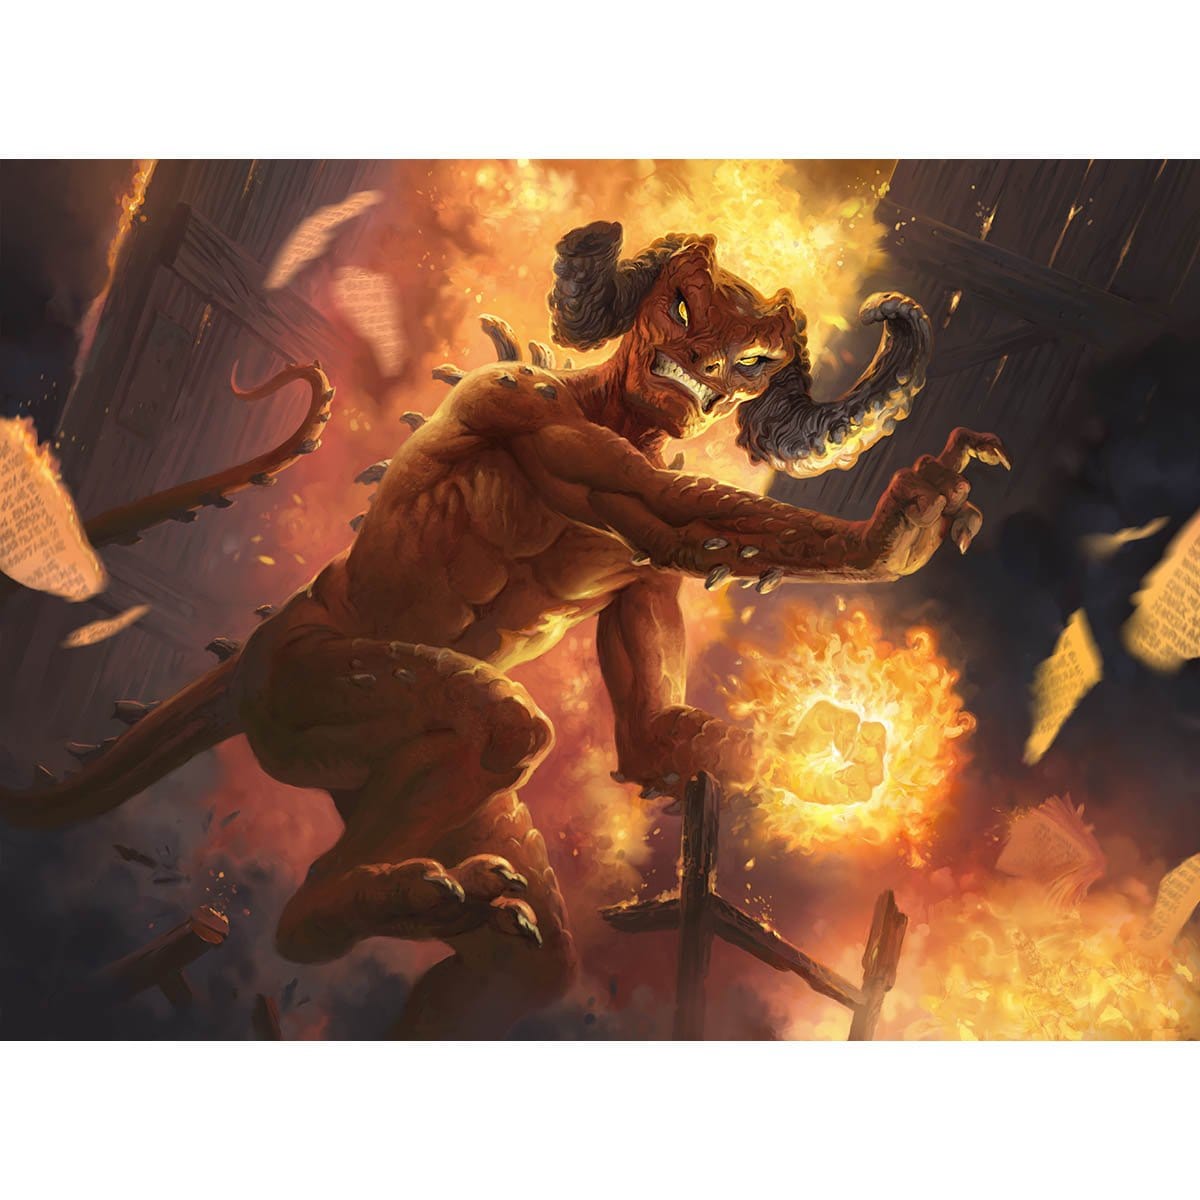 Vengeful Devil Print - Print - Original Magic Art - Accessories for Magic the Gathering and other card games